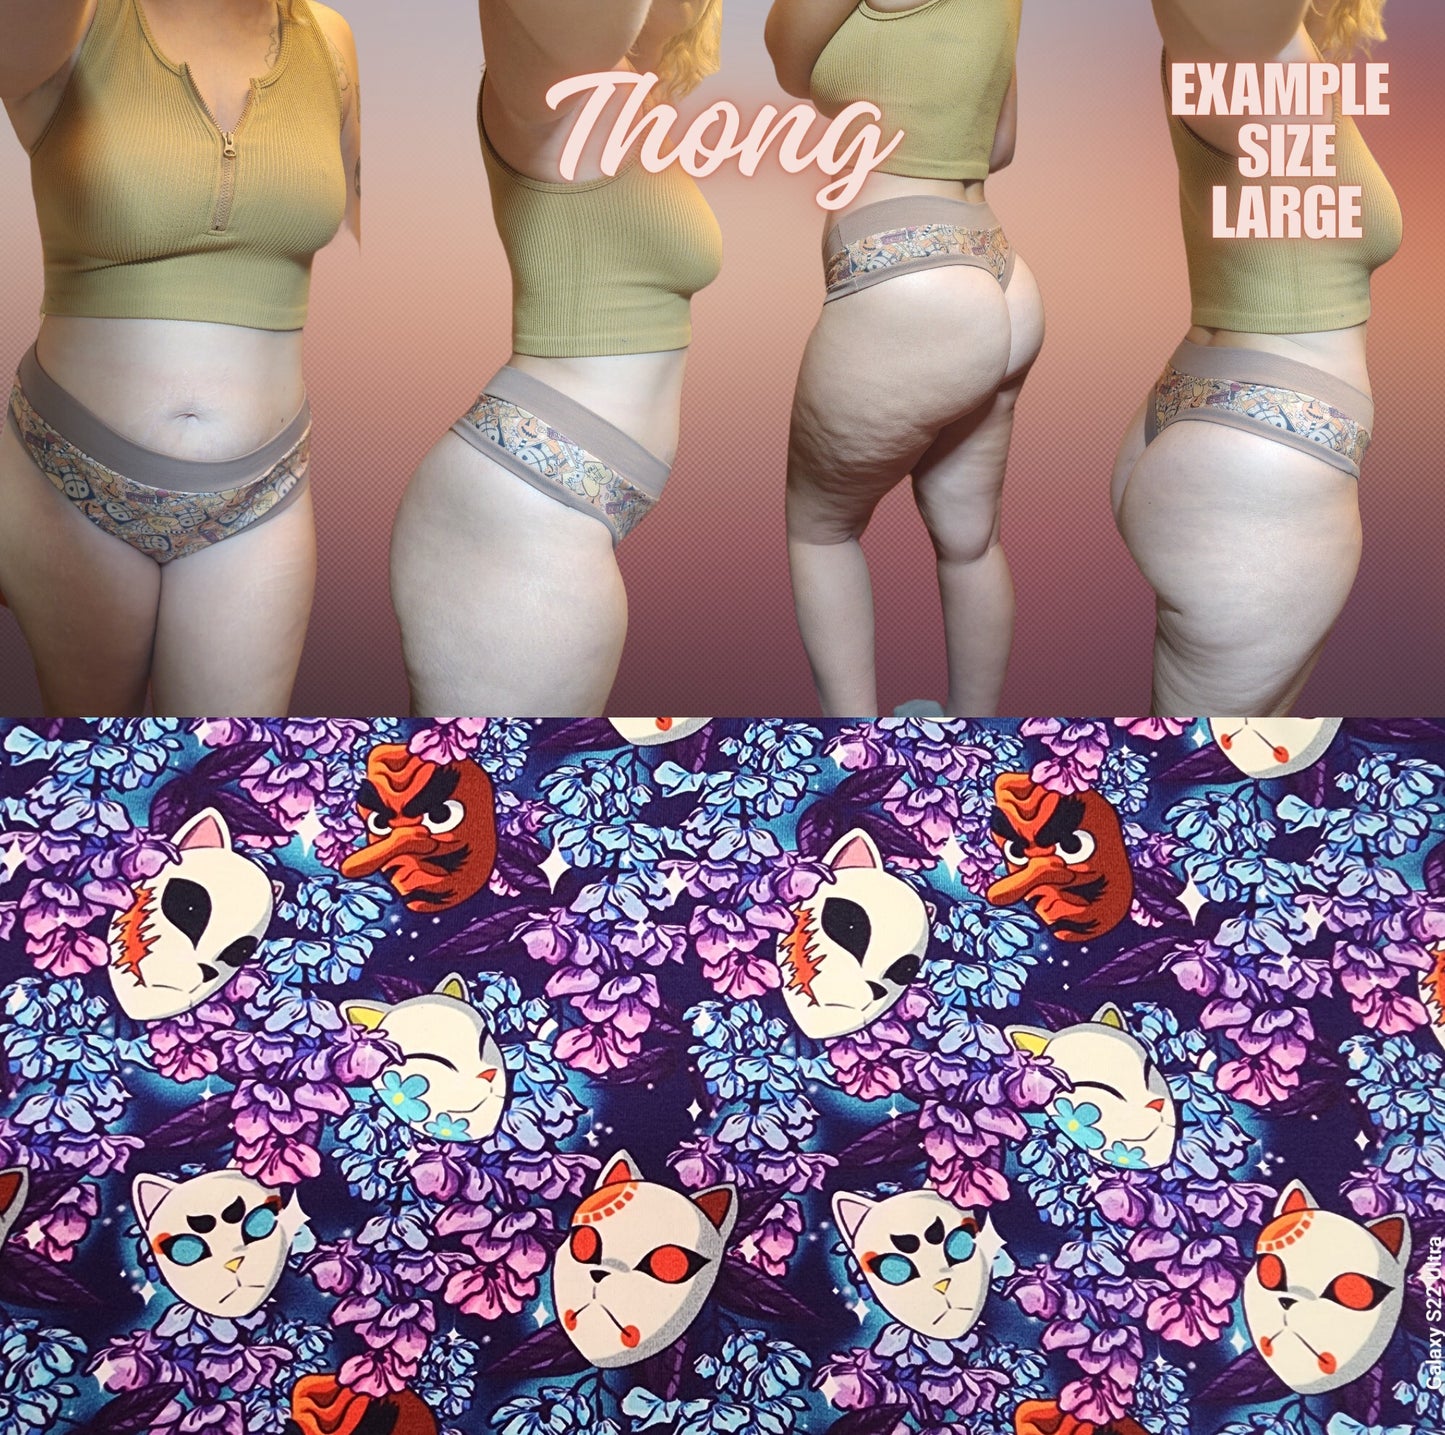 Anime, Horror, Cartoon x6 Prints | Thondlewear, Thongs for every body | Elastic or Knit Bands